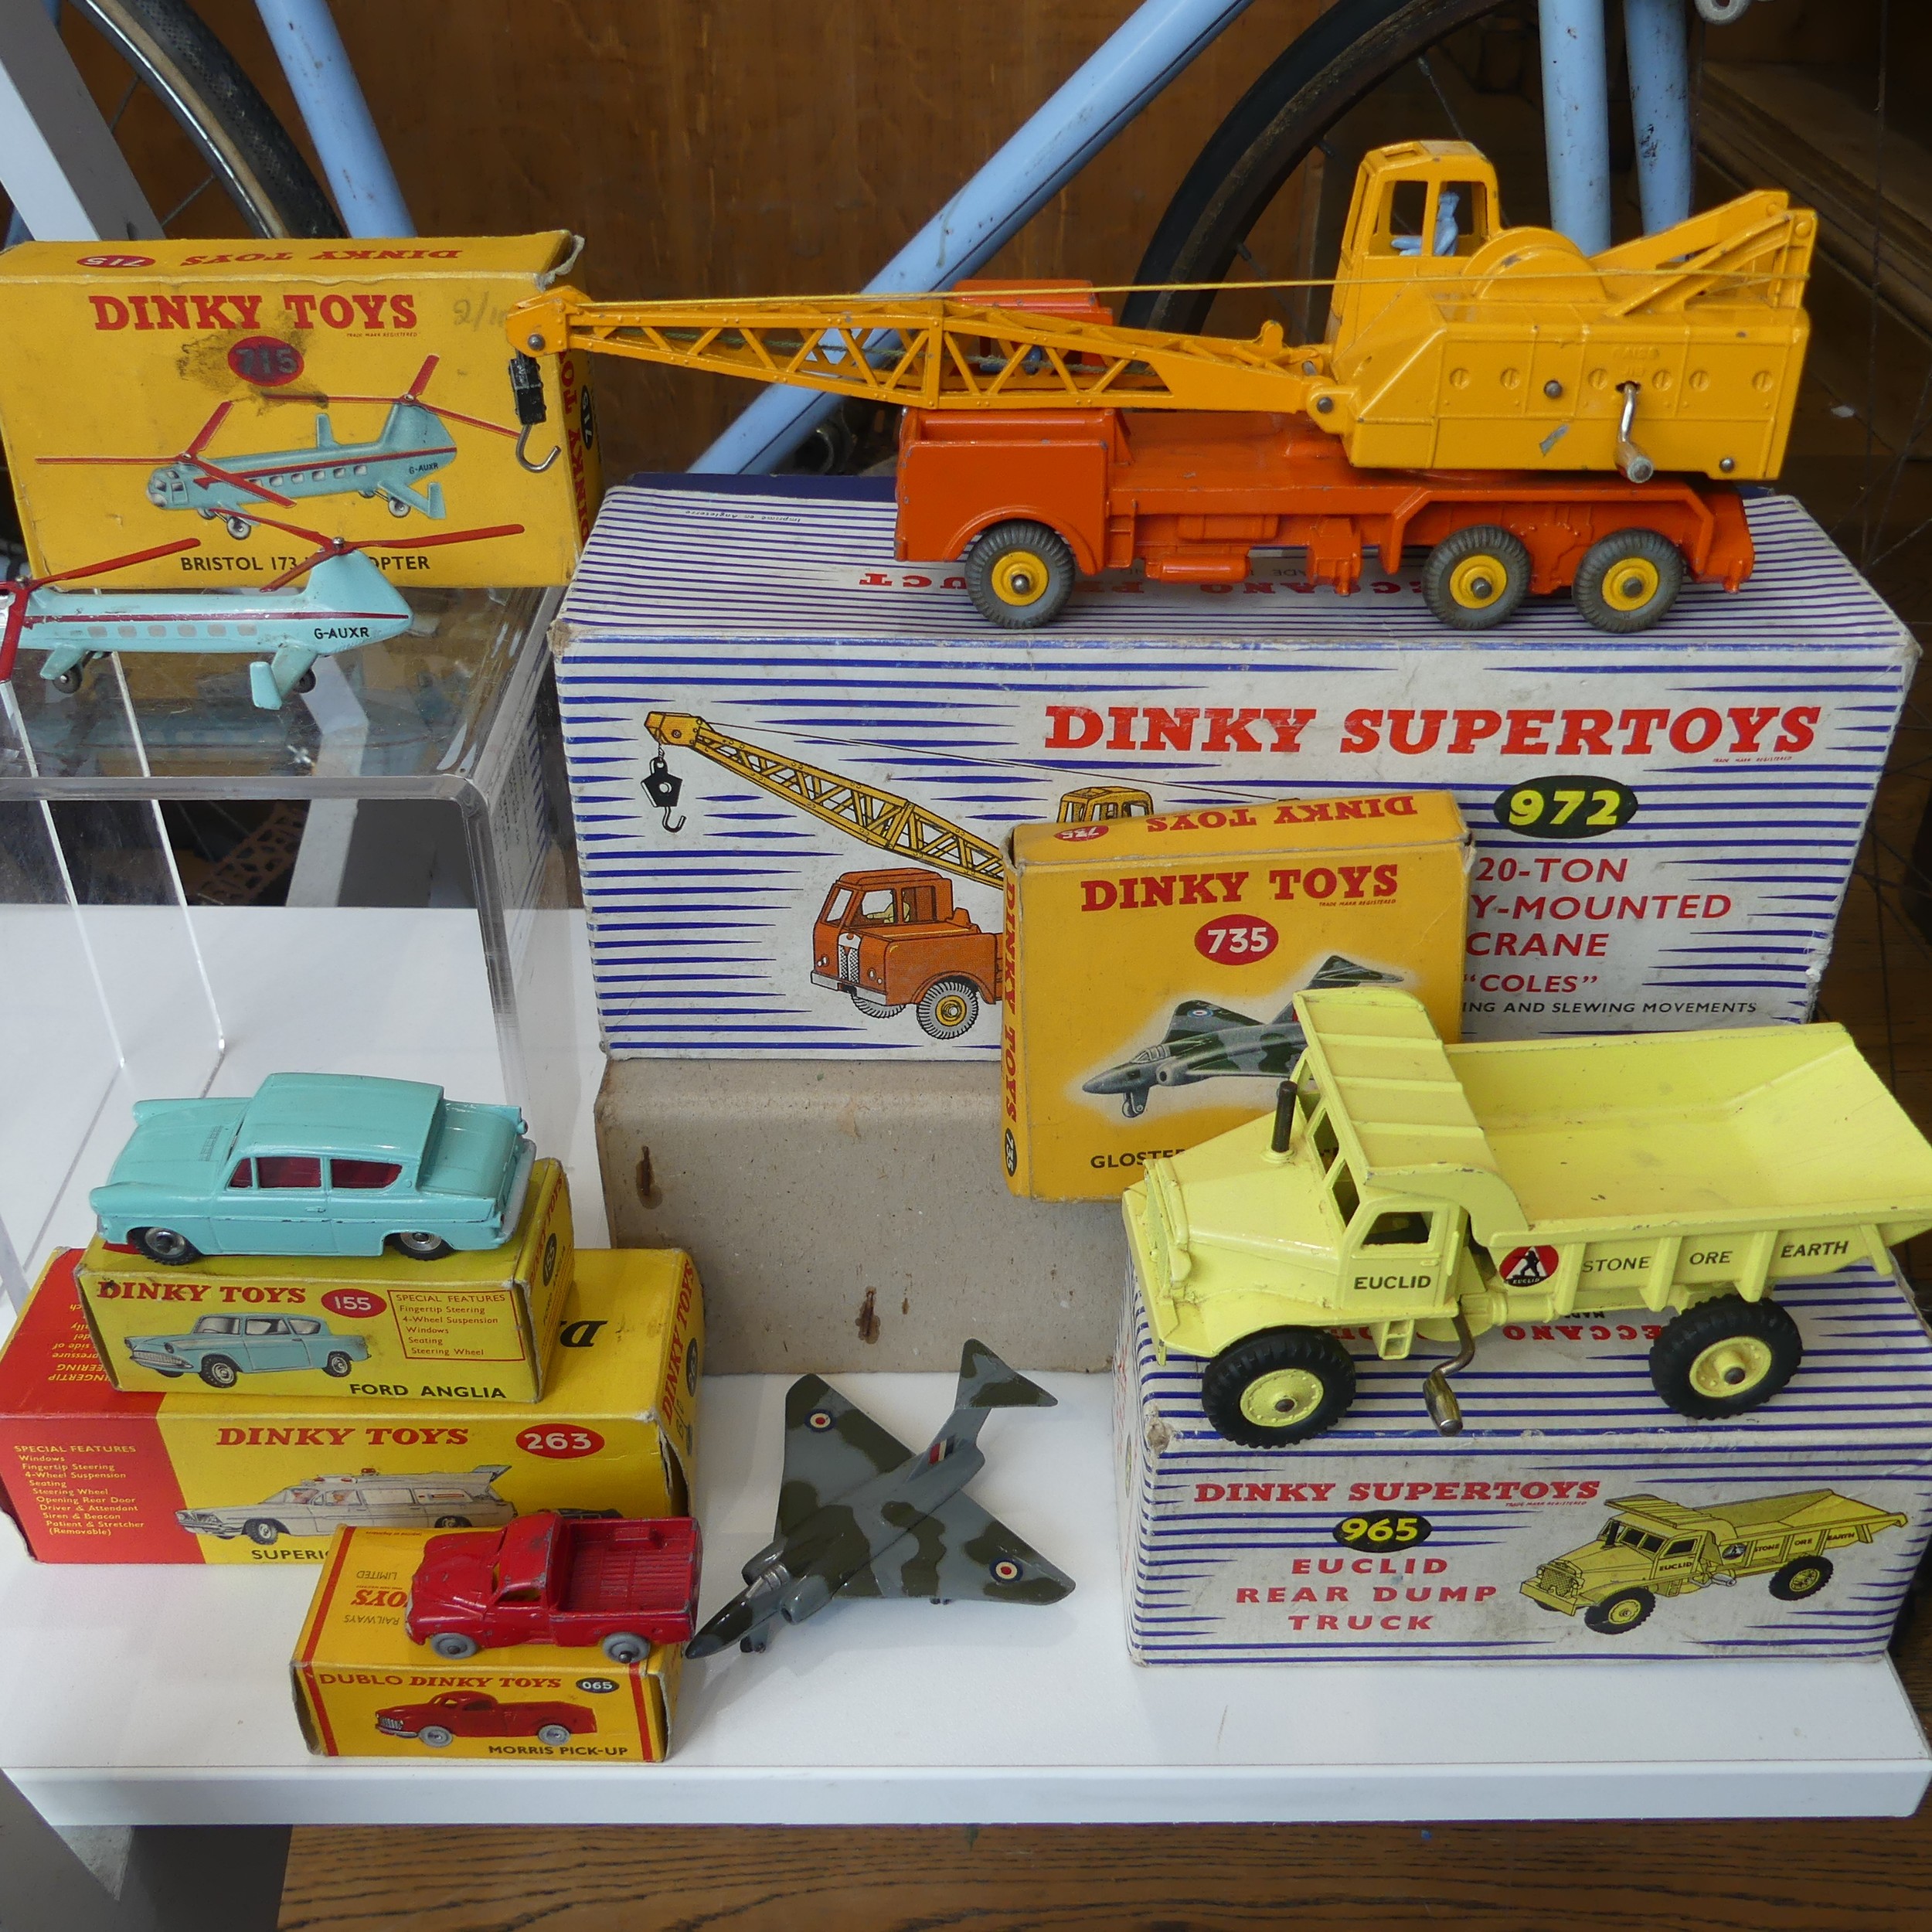 Dinky Toys; six boxed models, including 155 Ford Anglia, 263 Superior Criterion Ambulance, 965